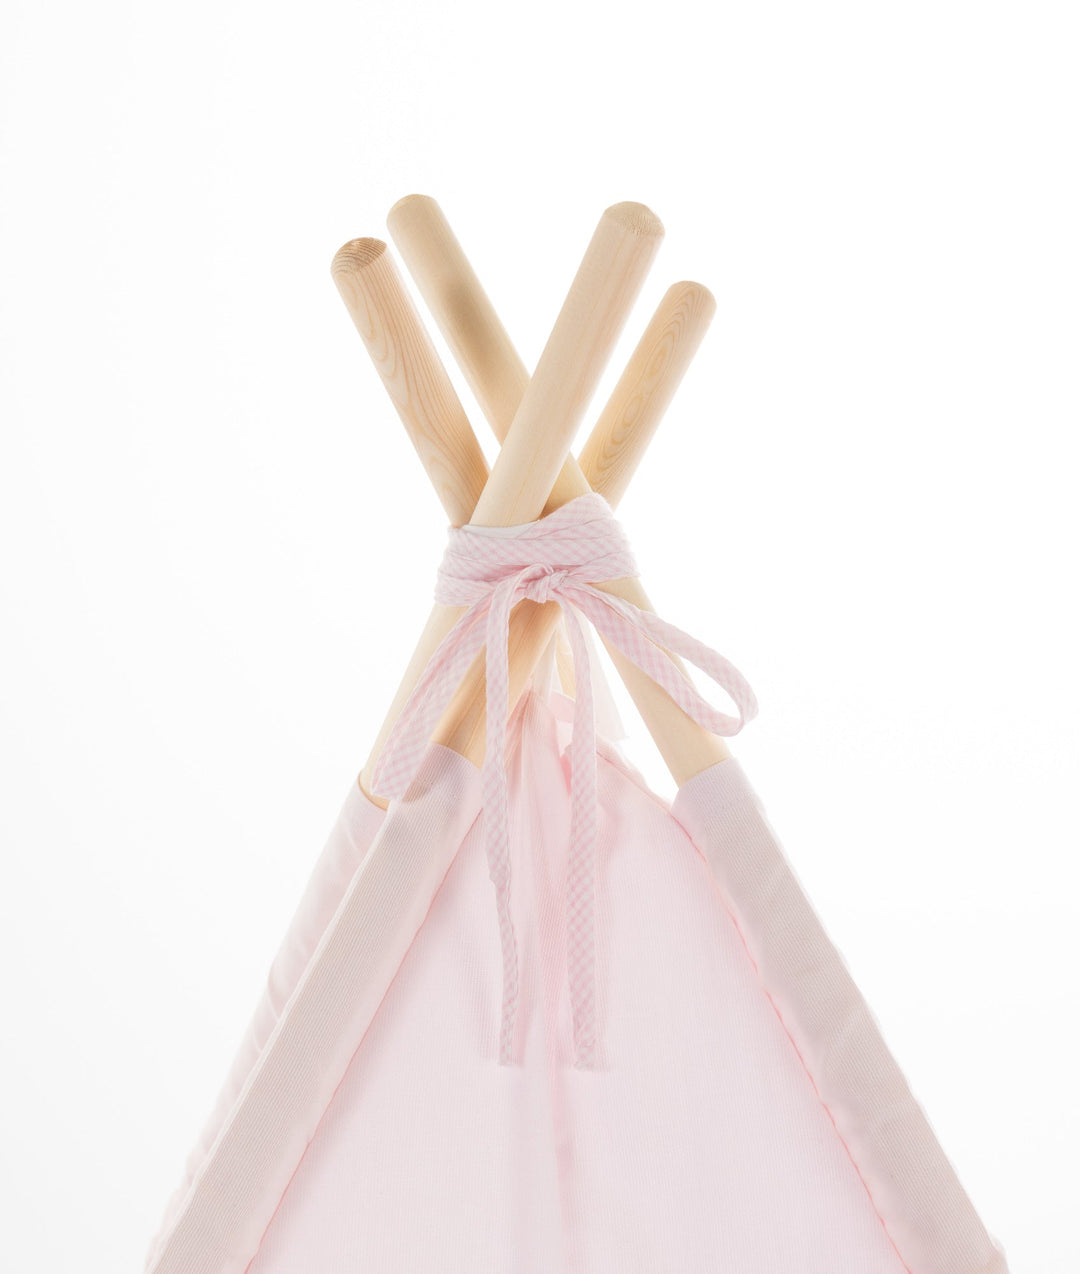 Teepee Tent - Pink